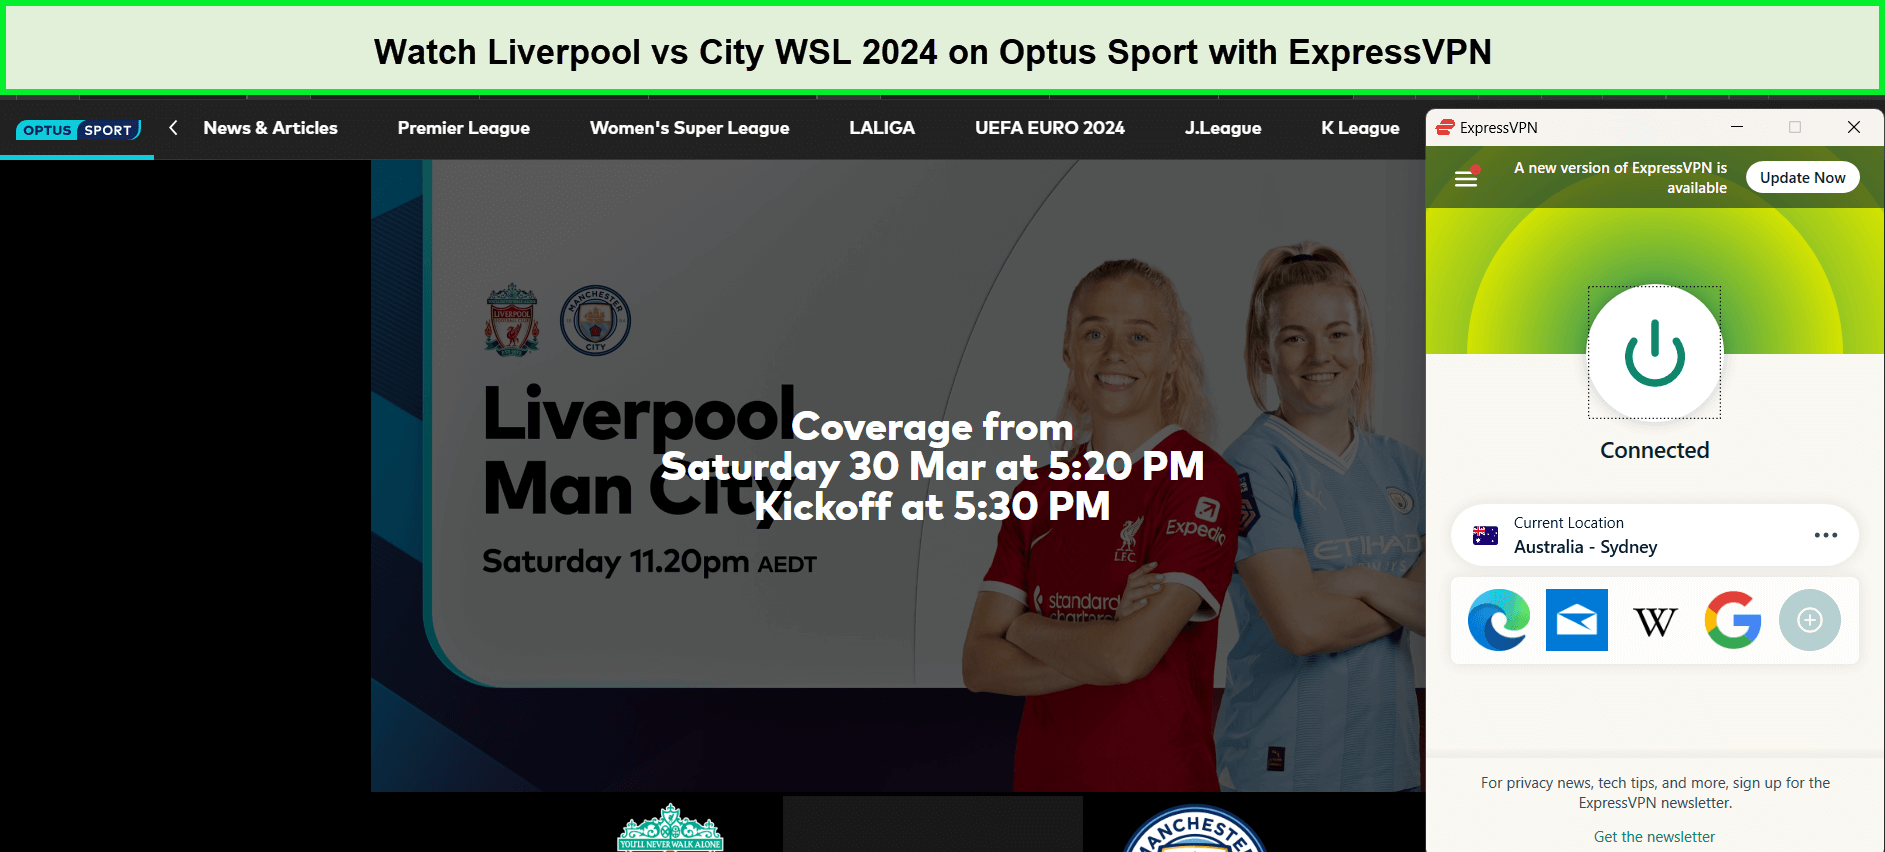 watch-Liverpool-vs-City-WSL-2024-in-Hong Kong-on-Optus-Sport-with-expressvpn